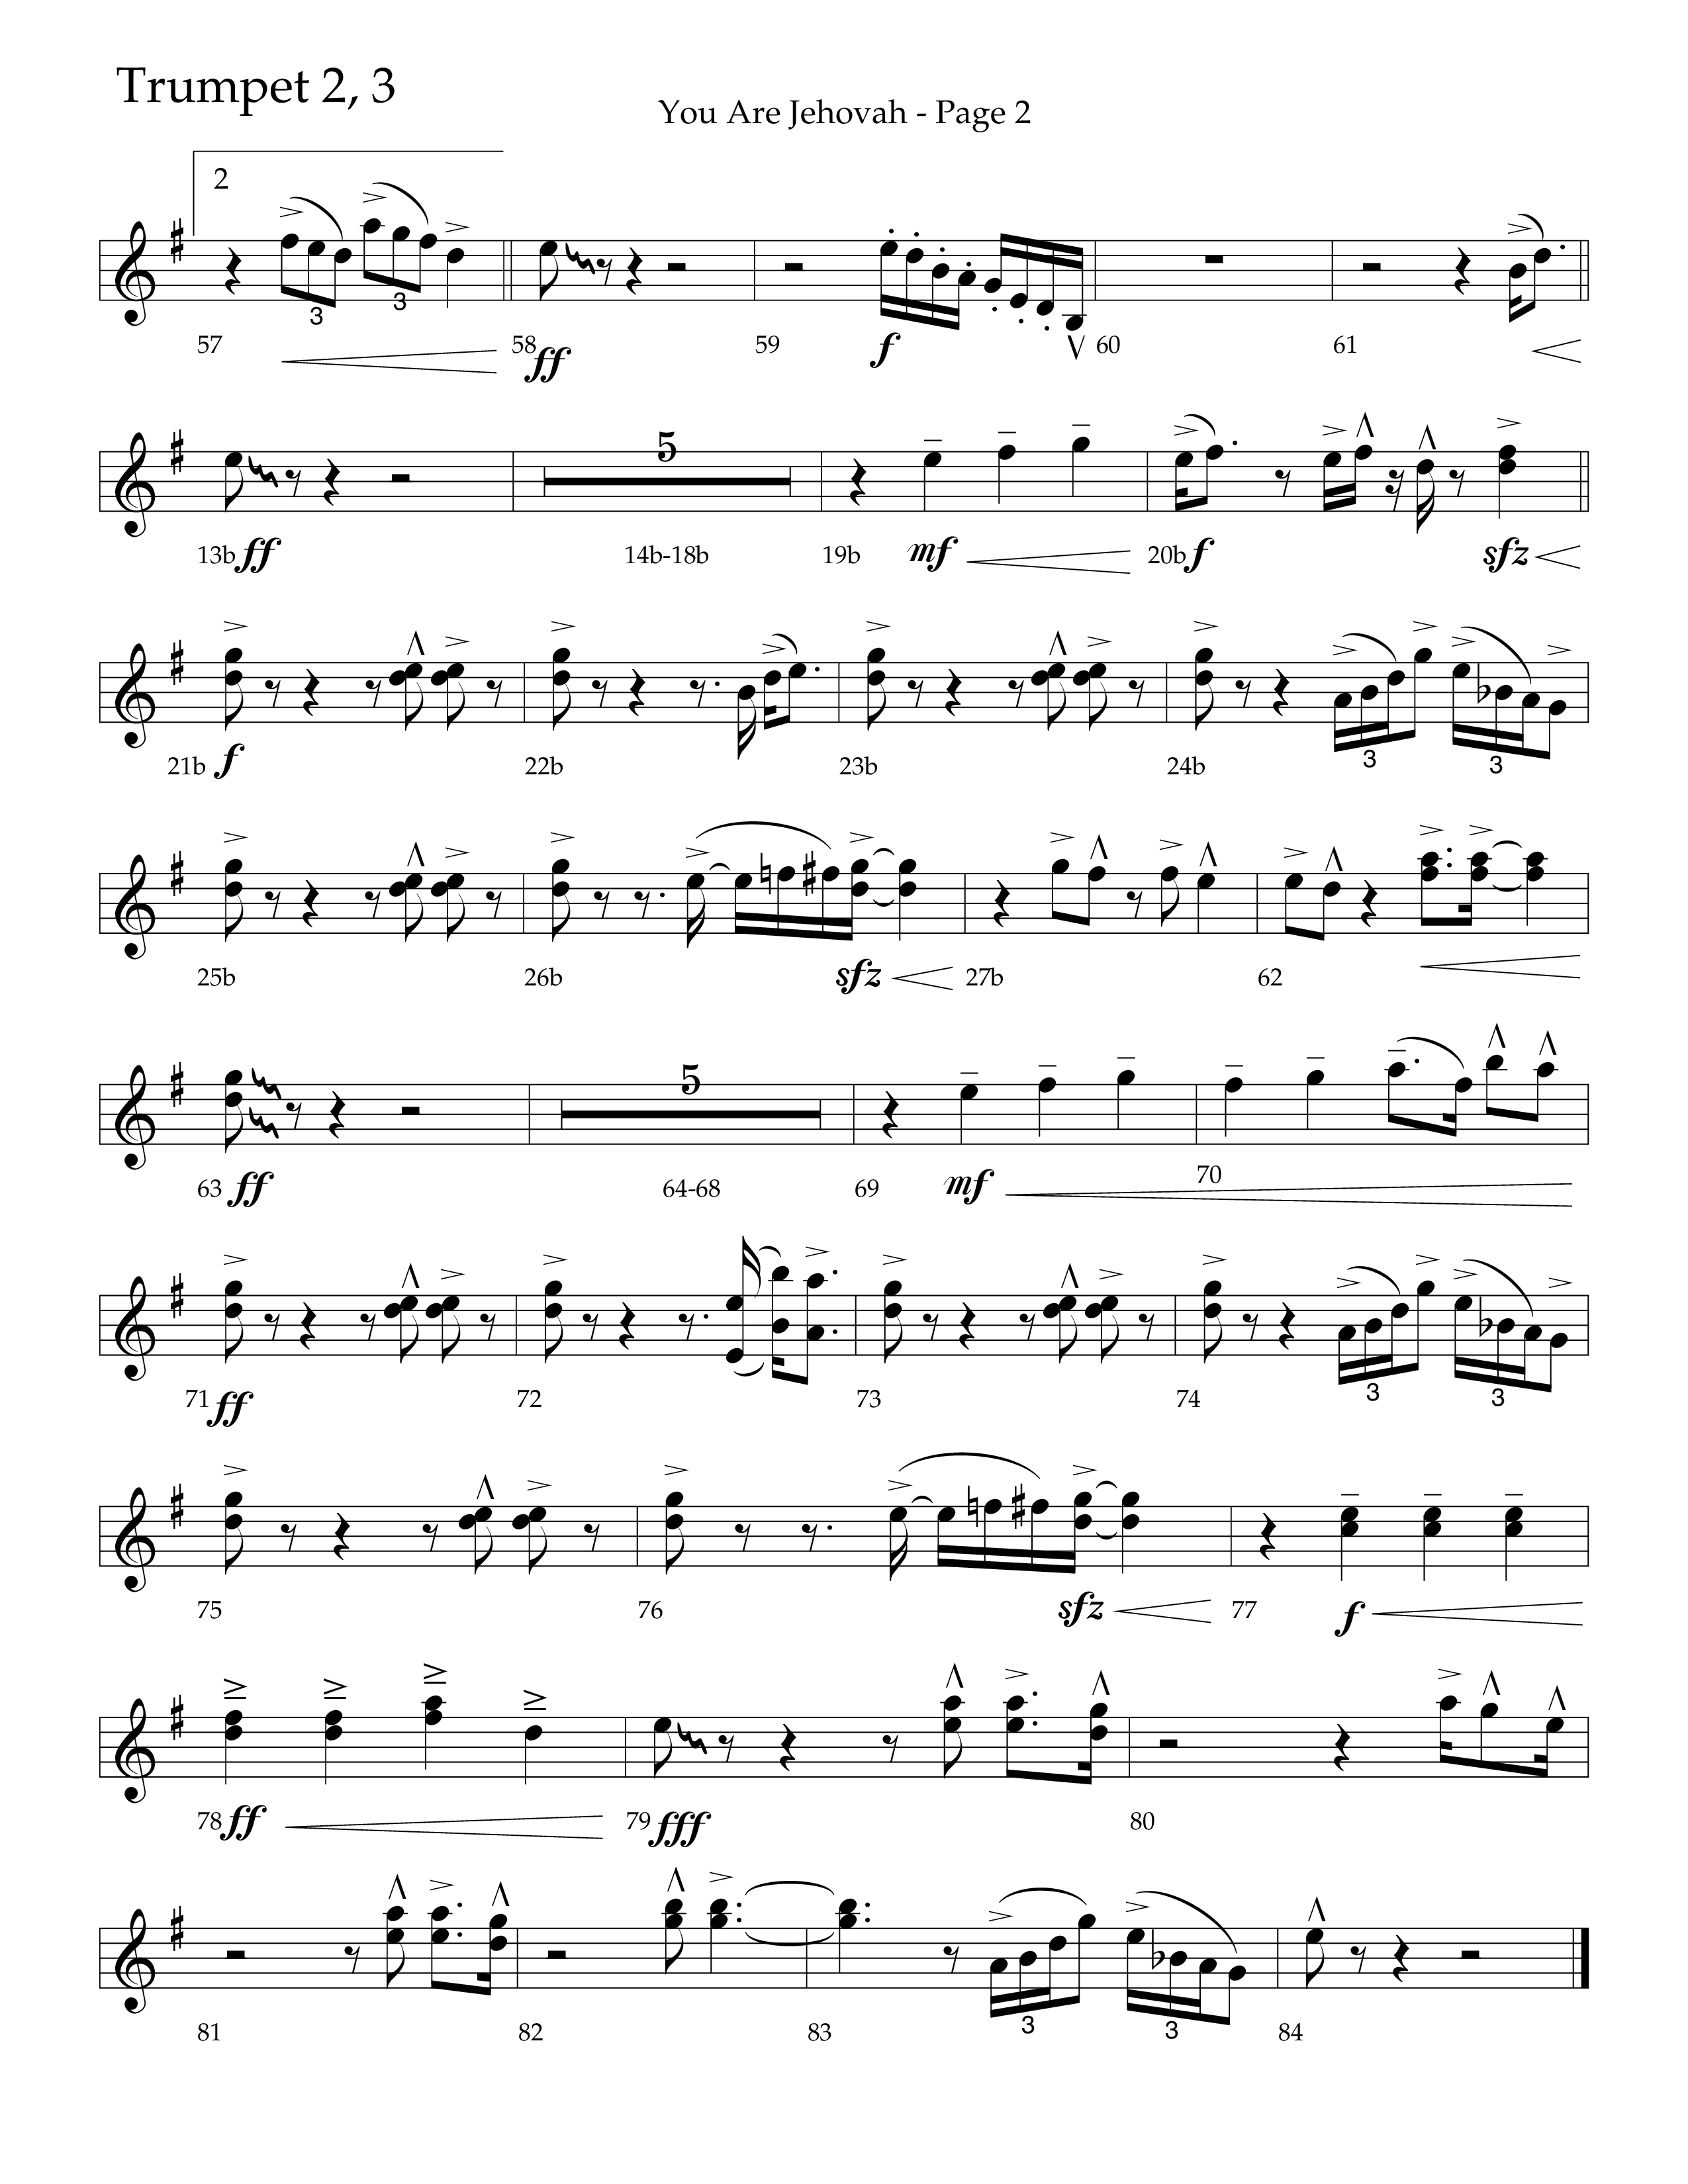 You Are Jehovah (Choral Anthem SATB) Trumpet 2/3 (Lifeway Choral / Arr. Cliff Duren)